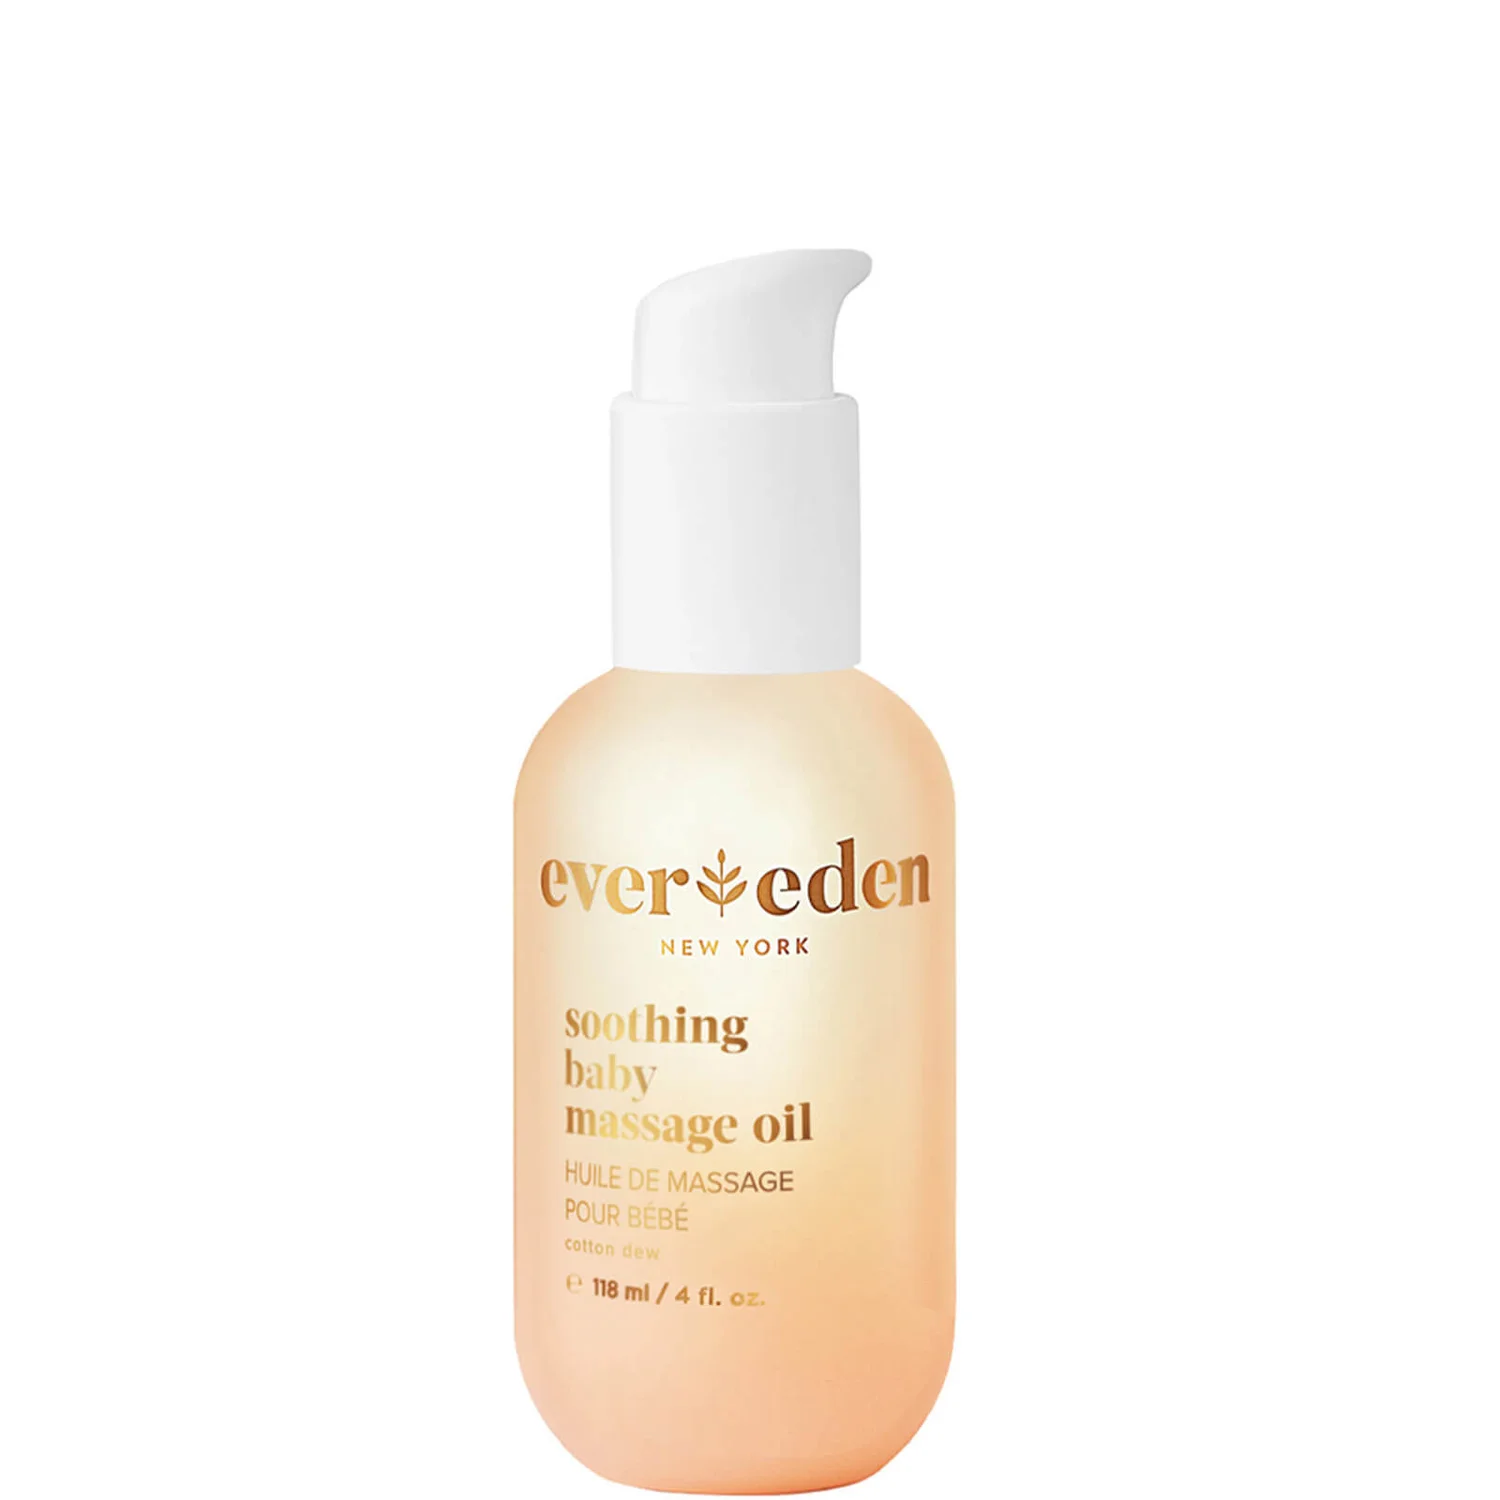 cultbeauty.com | EVEREDEN SOOTHING BABY MASSAGE OIL COTTON DEW